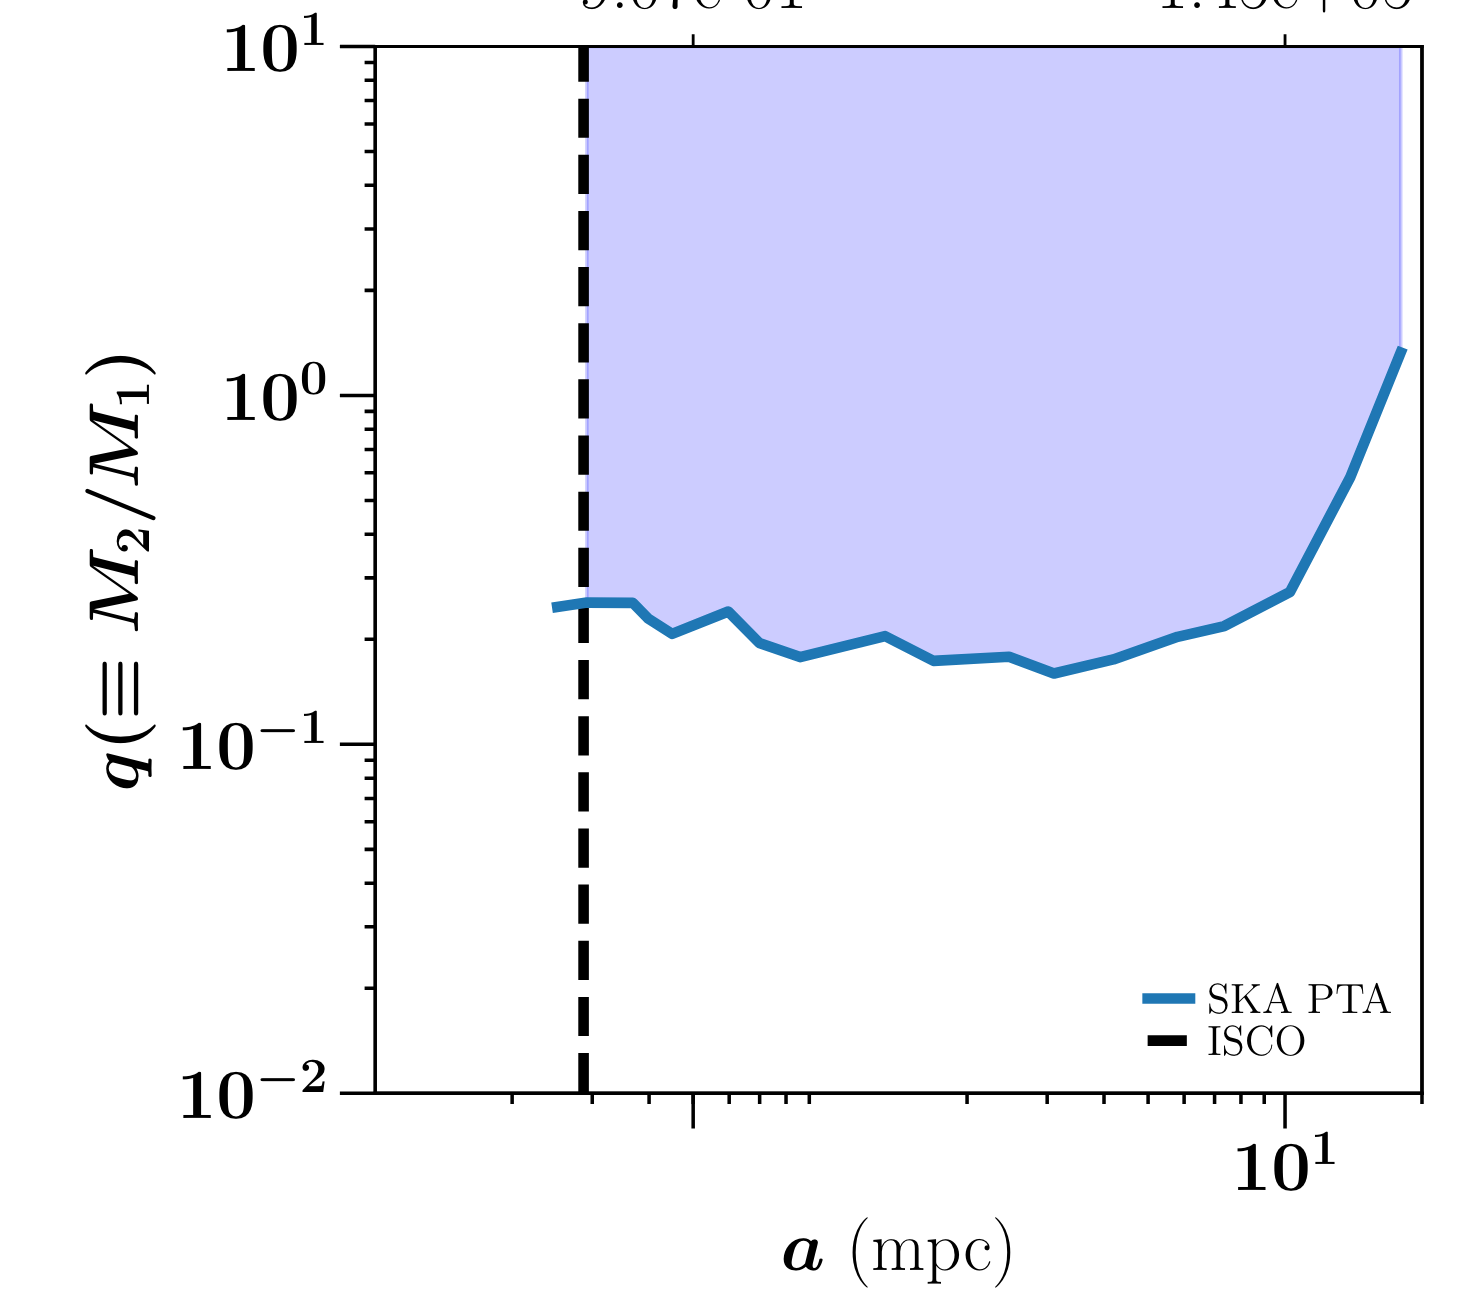 Blue shaded region demonstrating the detection threshold of the SKA PTA as a function of binary separation (horizontal axis) and merger mass ratio (vertical axis). The curve is flat between the ISCO and a separation of ~10 mpc, at which point it curves upward.